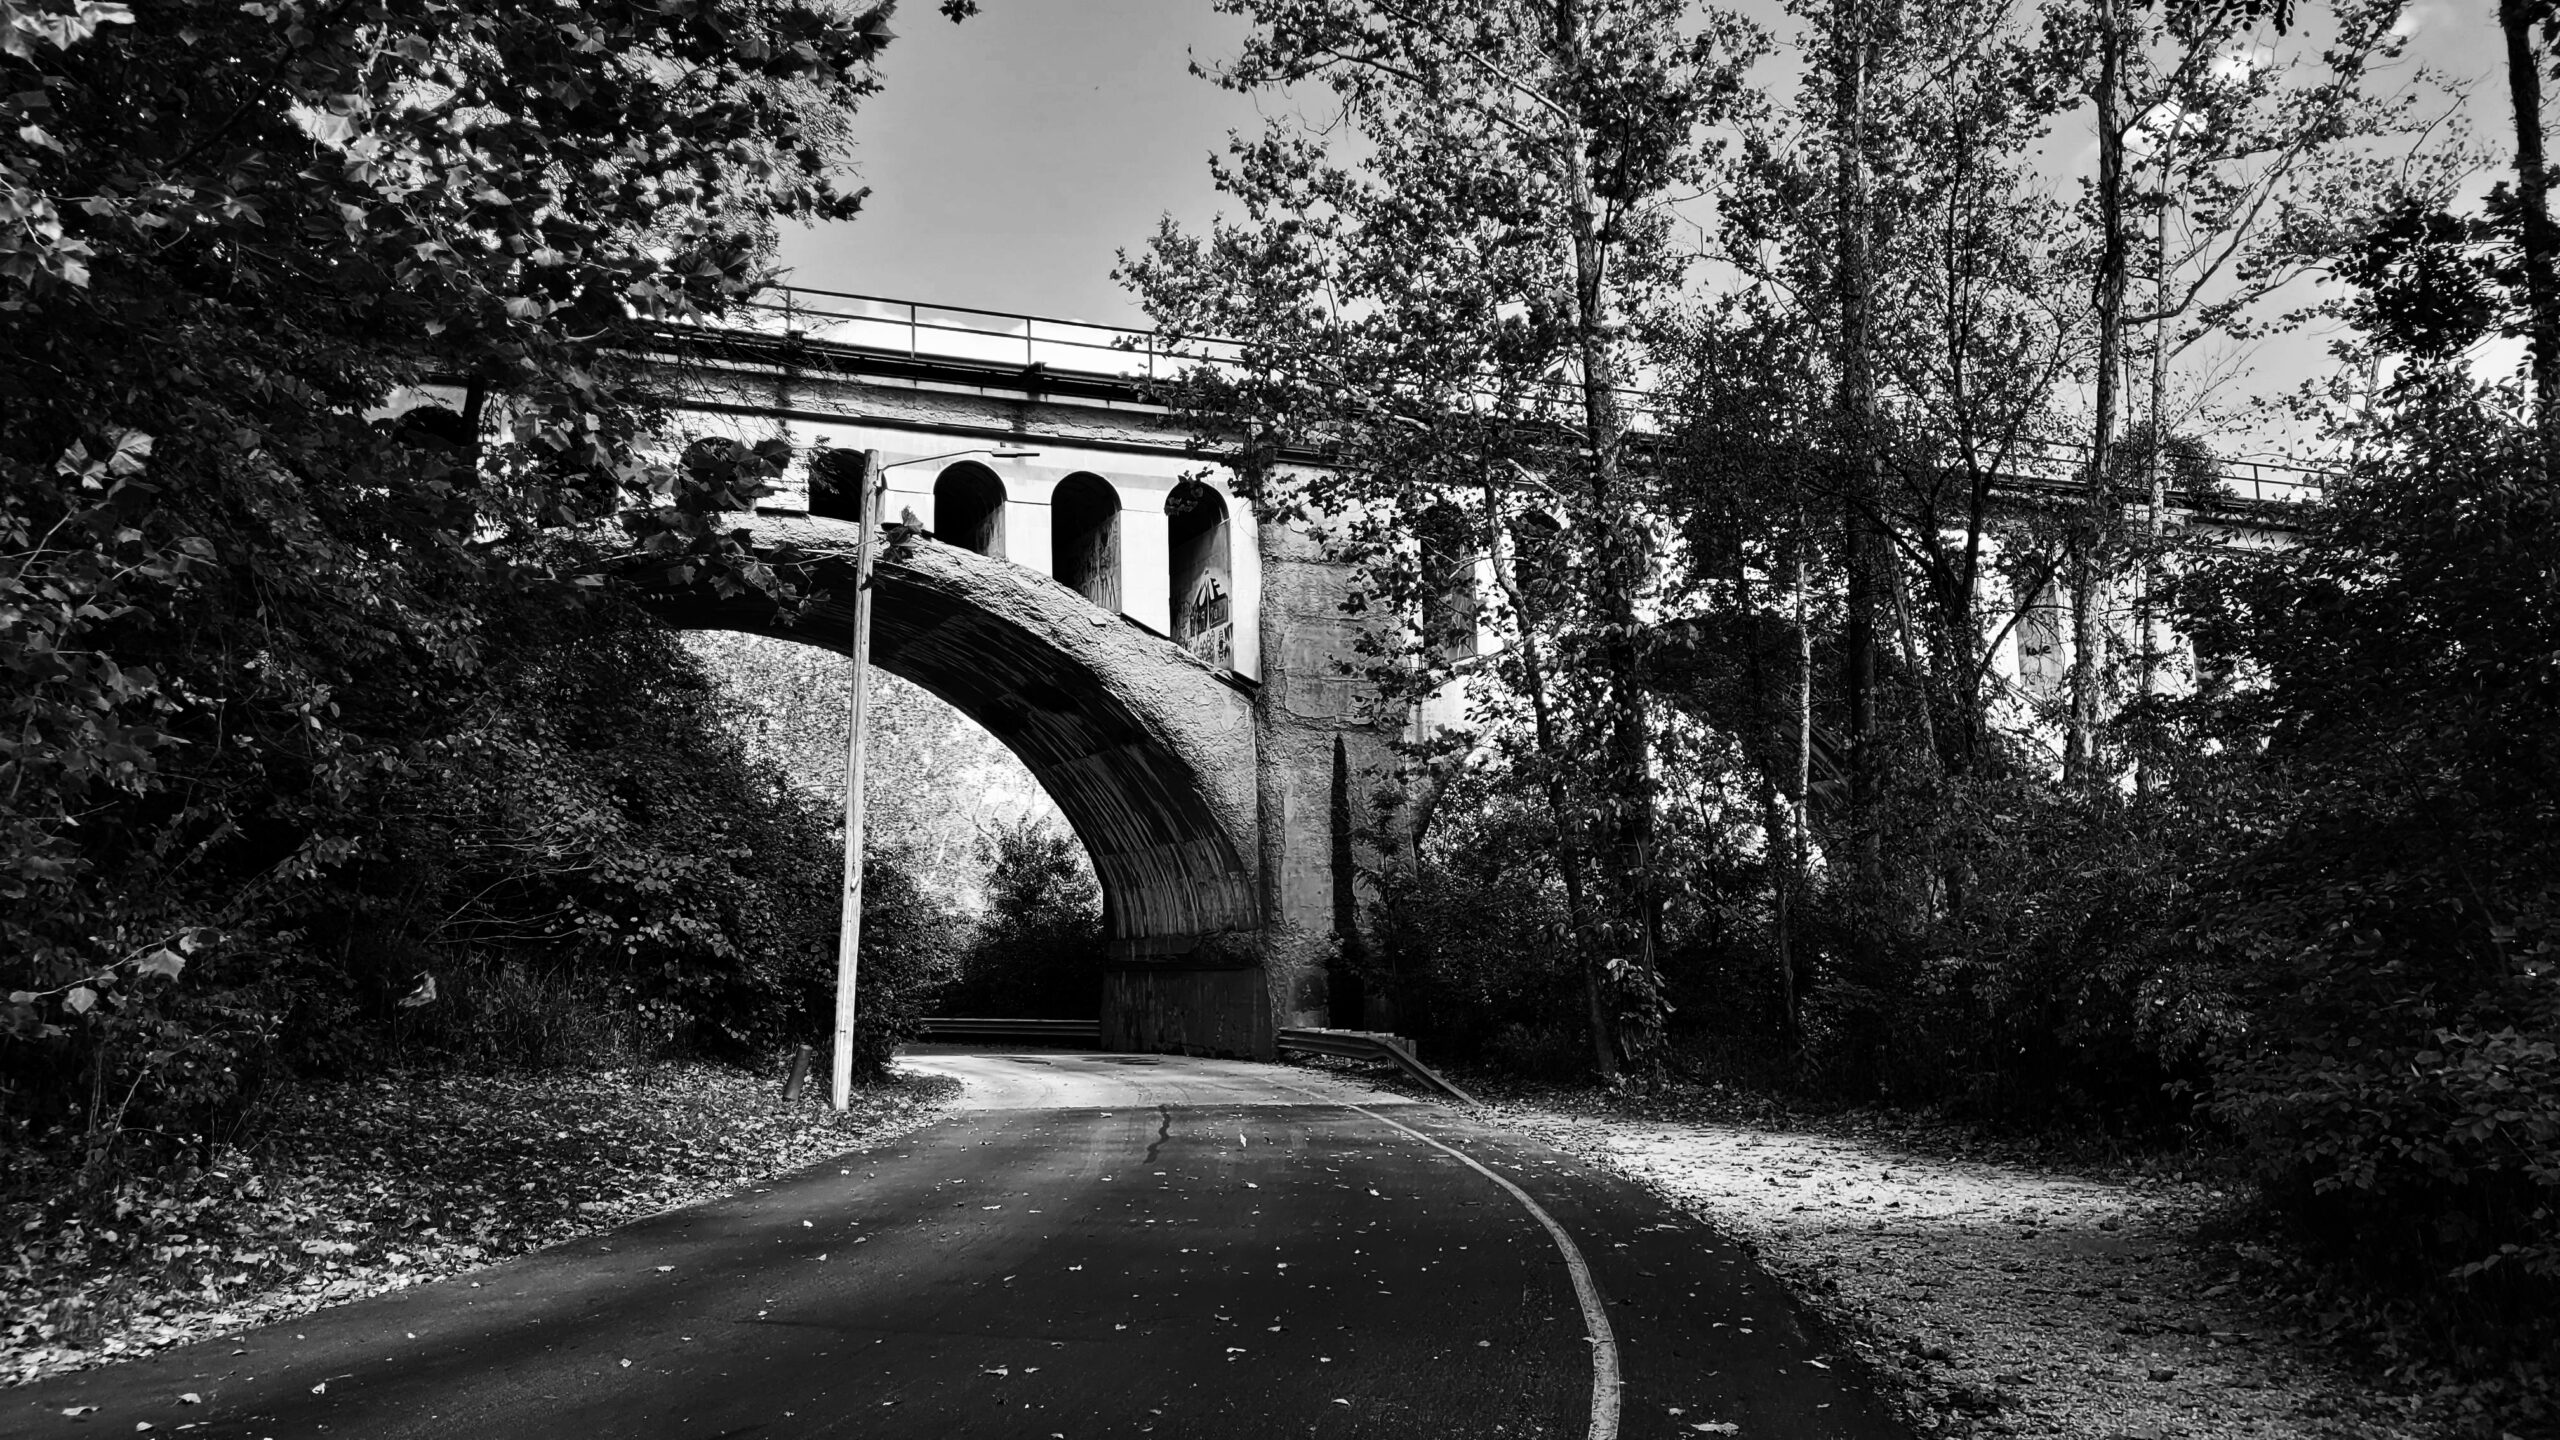 A black and white photo of a road leading under a bridge. The spandrel arch bridge is surrounded by trees